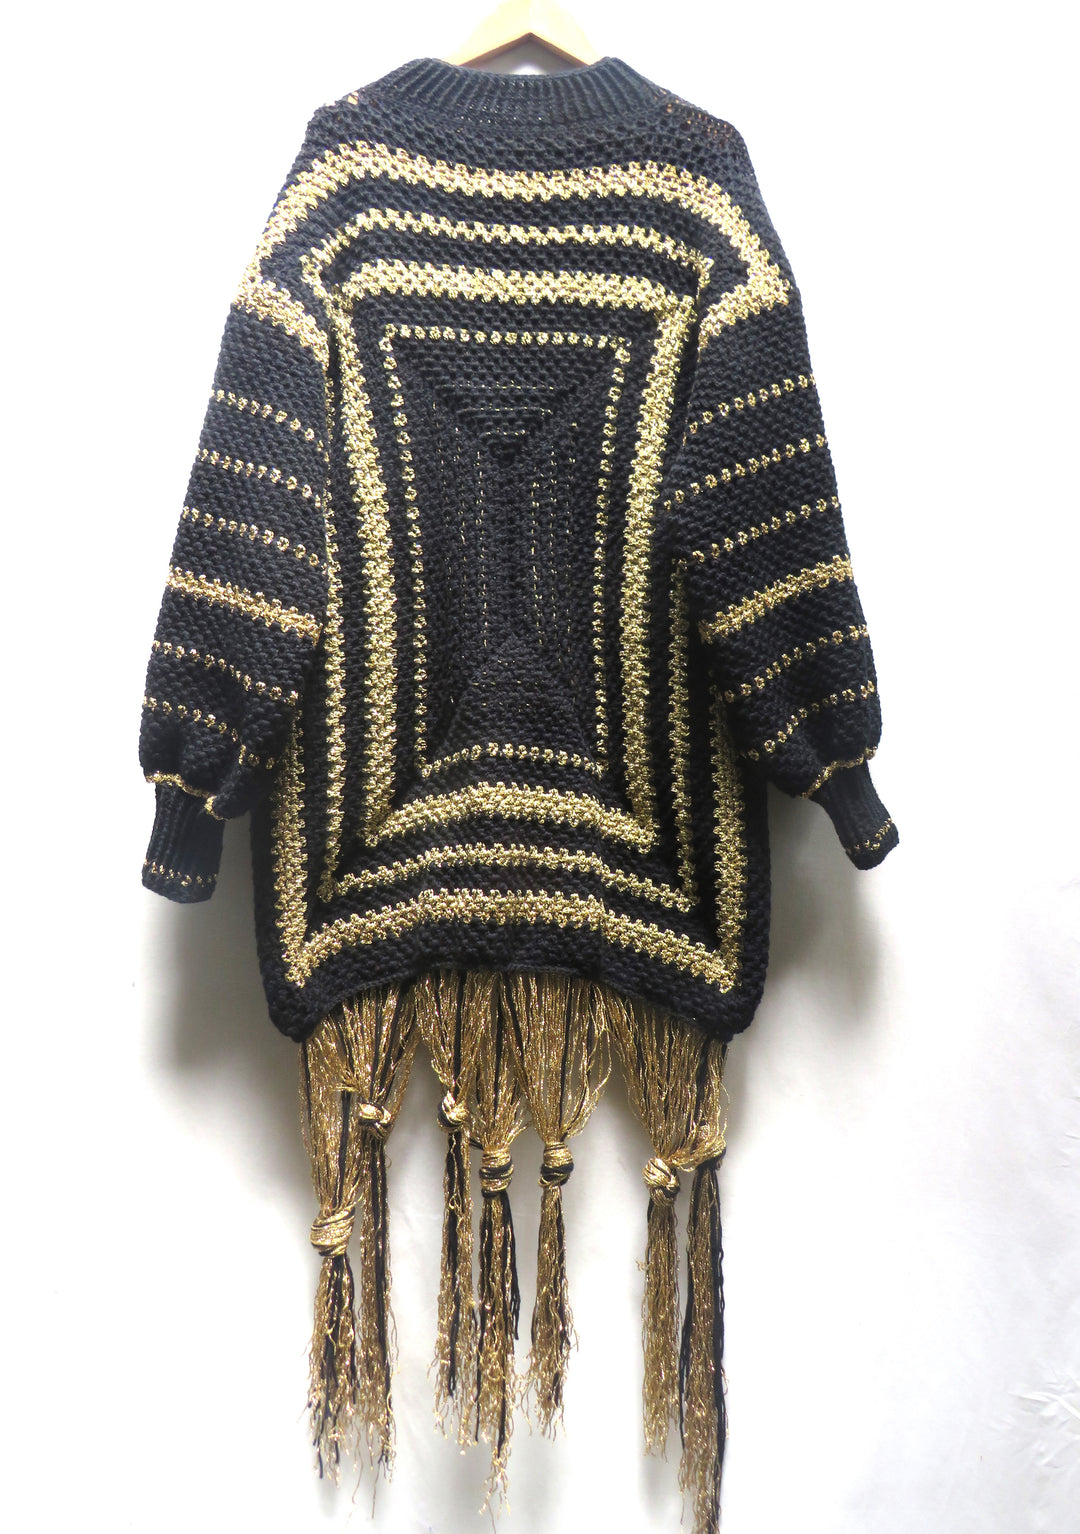 Hand Knitted Metallic Black Sweater Dress With Tassels